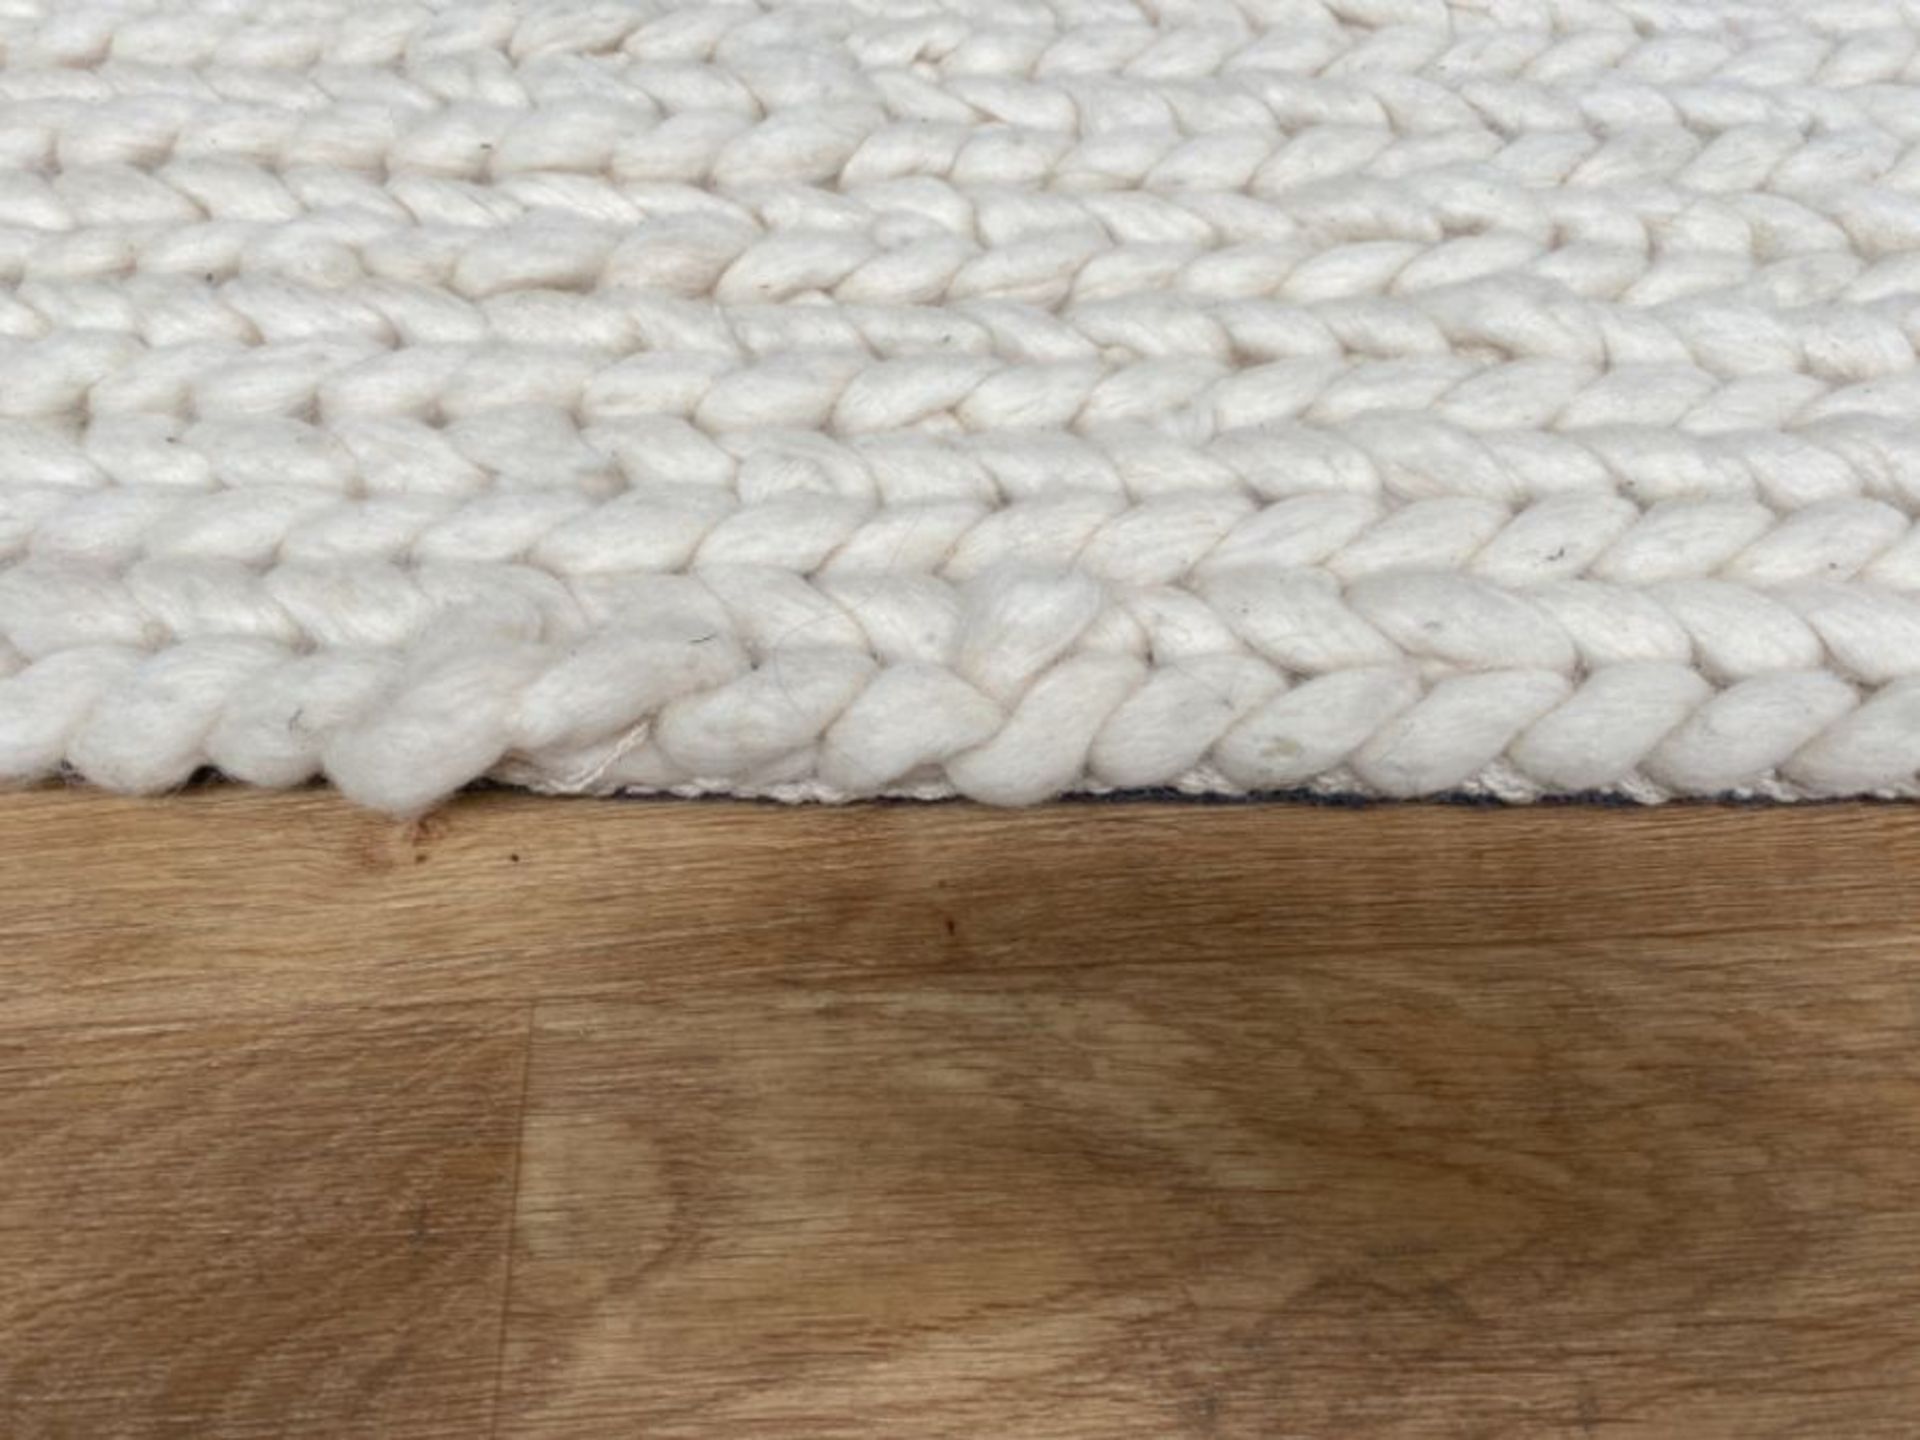 LA REDOUTE DIANO PURE WOOL KNIT EFFECT RUG (160X230) - Image 2 of 2